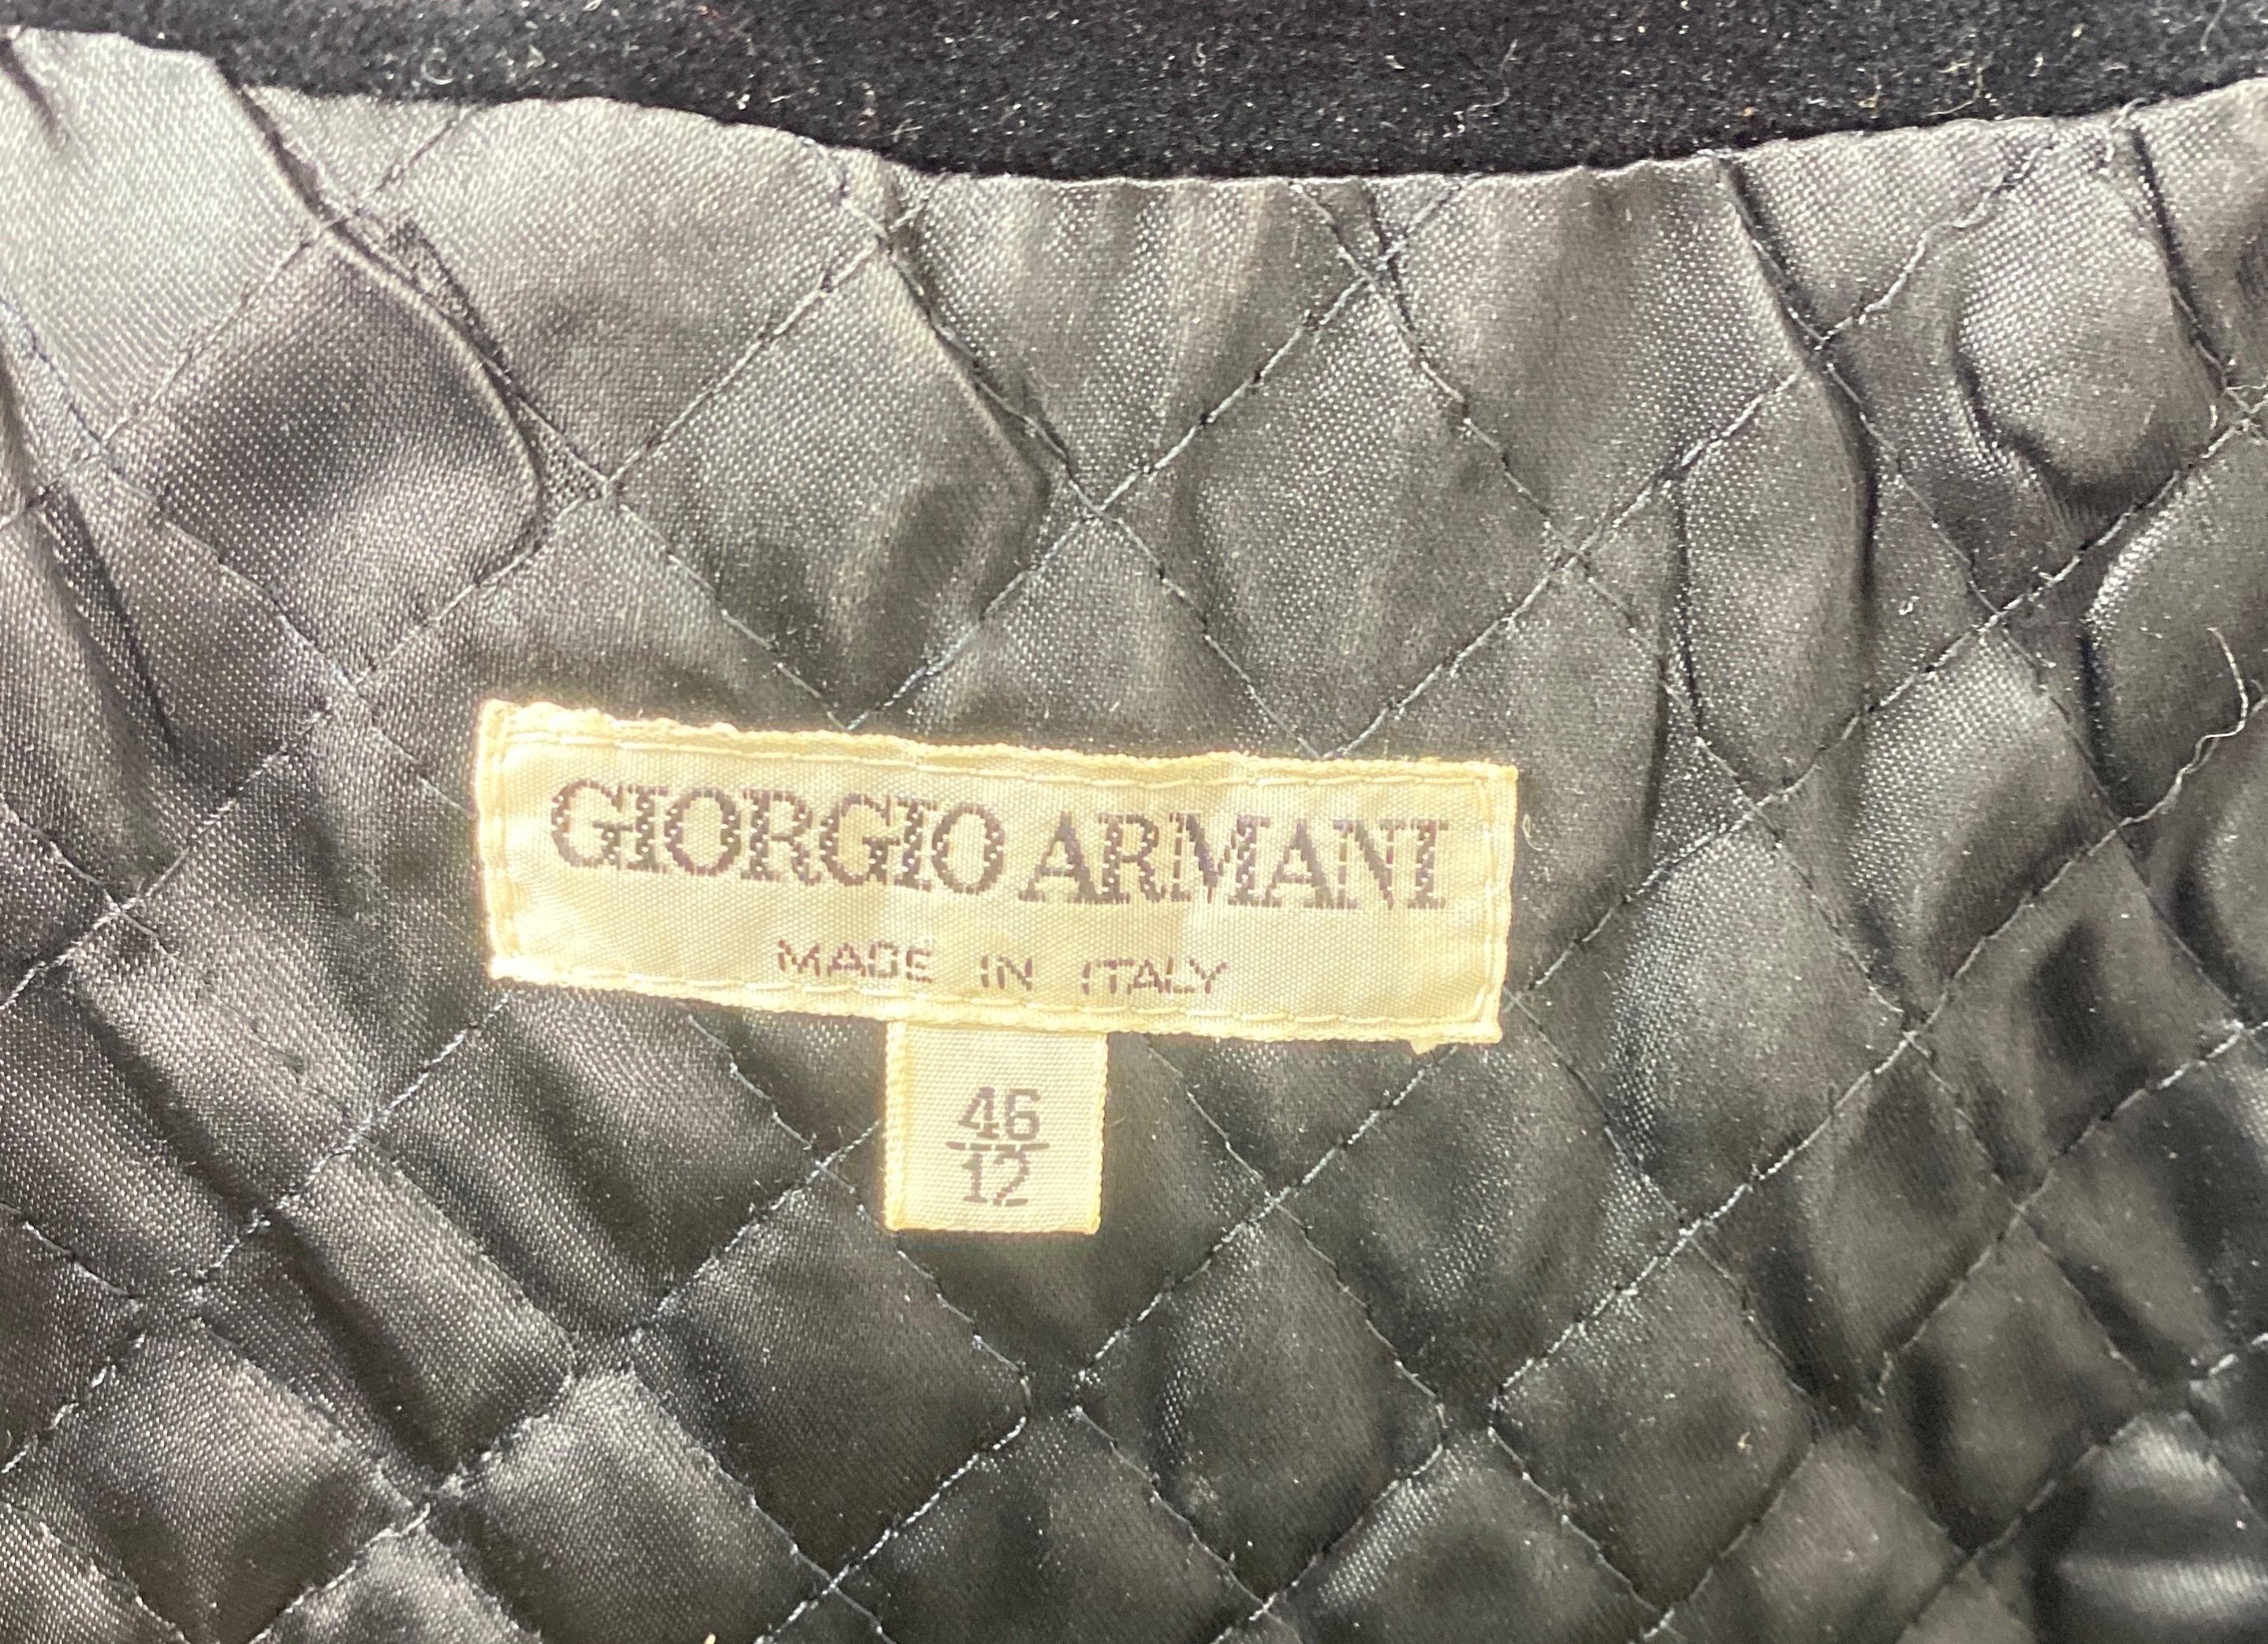 Giorgio Armani 1990’s Black and Ivory Tweed and Velvet Checkered Jacket -Size 46 For Sale 7